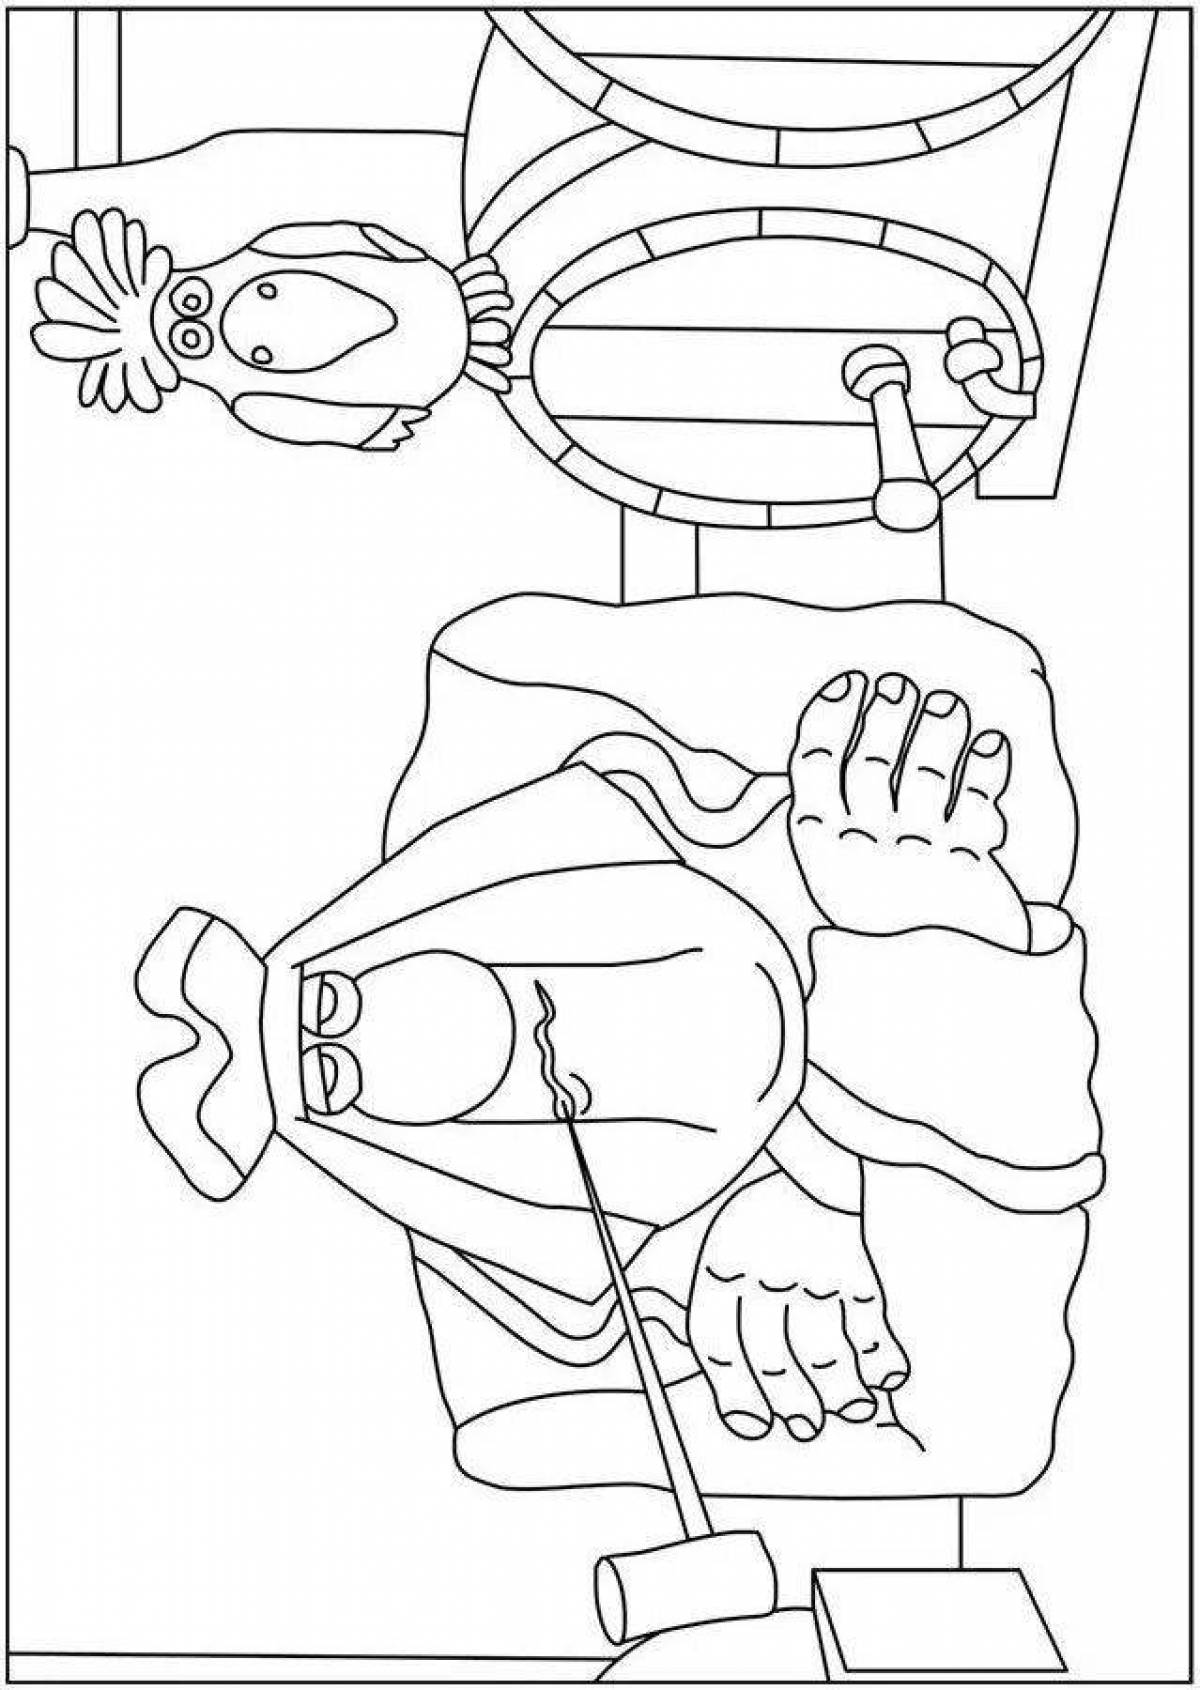 Dr Lipsey's fancy coloring book